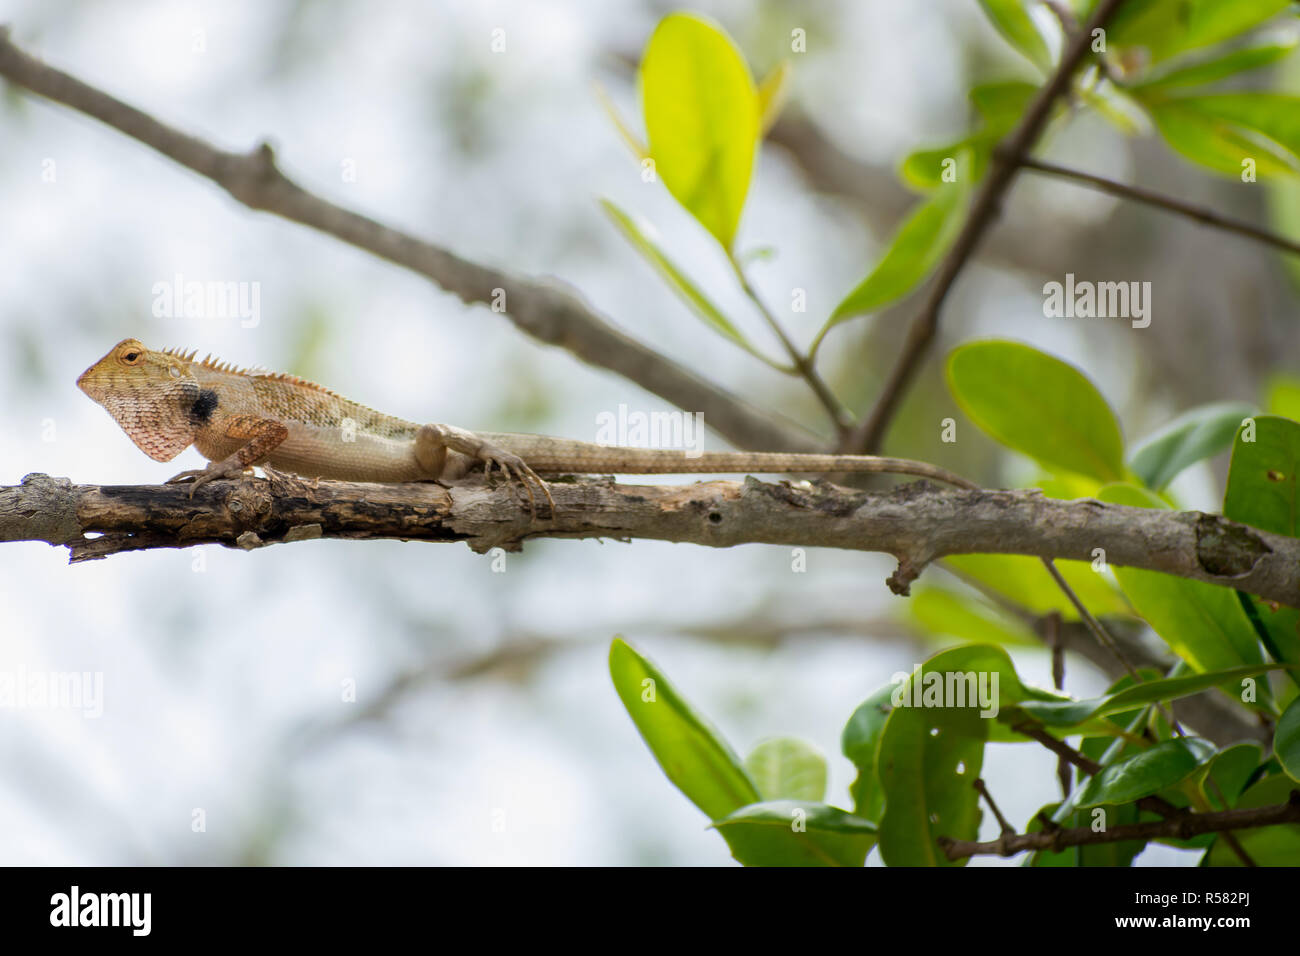 Young Brown Lizard on tree Stock Photo